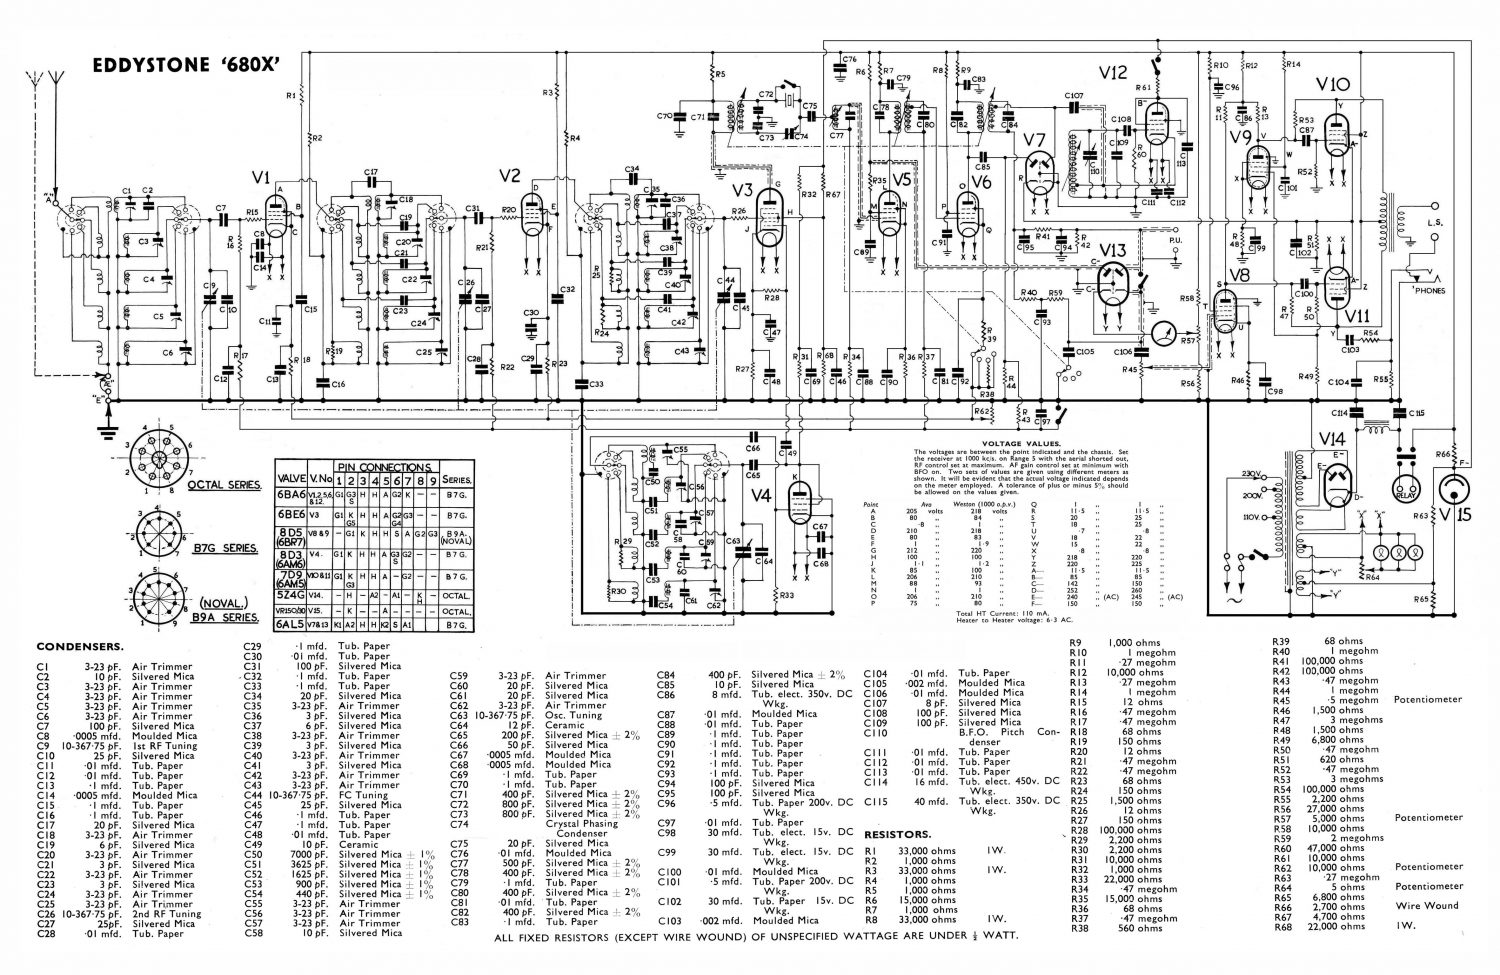 Eddystone Type 680X Communications Receiver - Schematic Diagrams